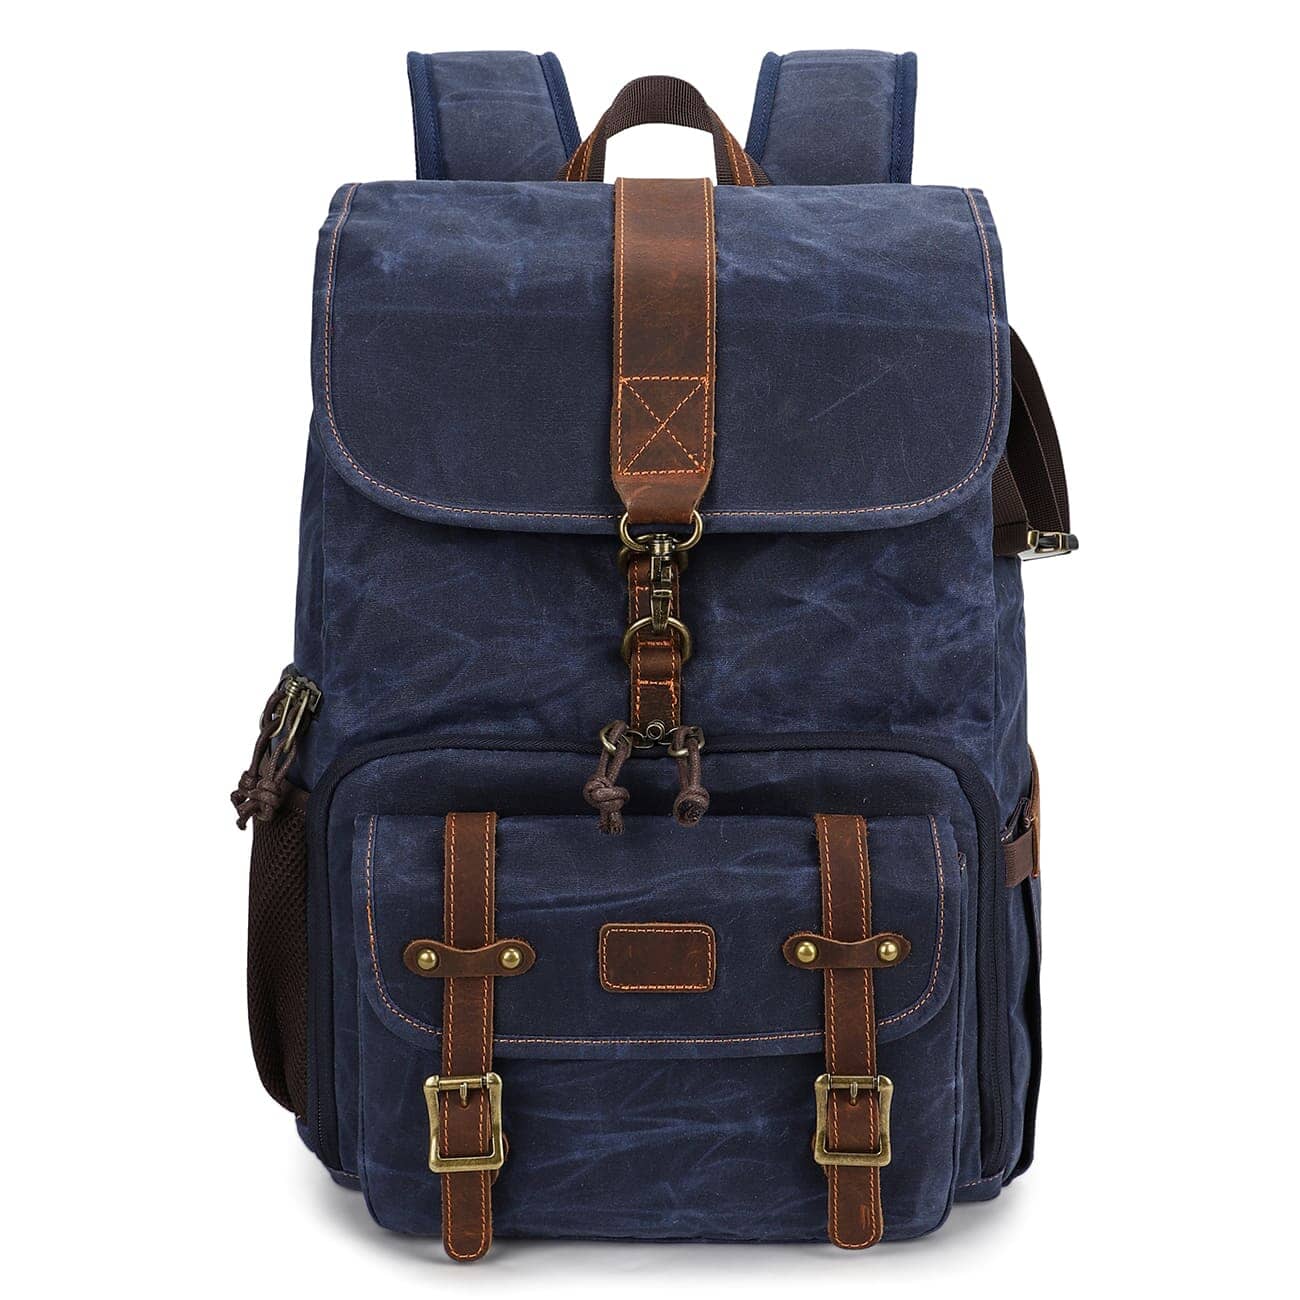 Canvas camera backpack, navy blue color, waxed canvas and full grain leather